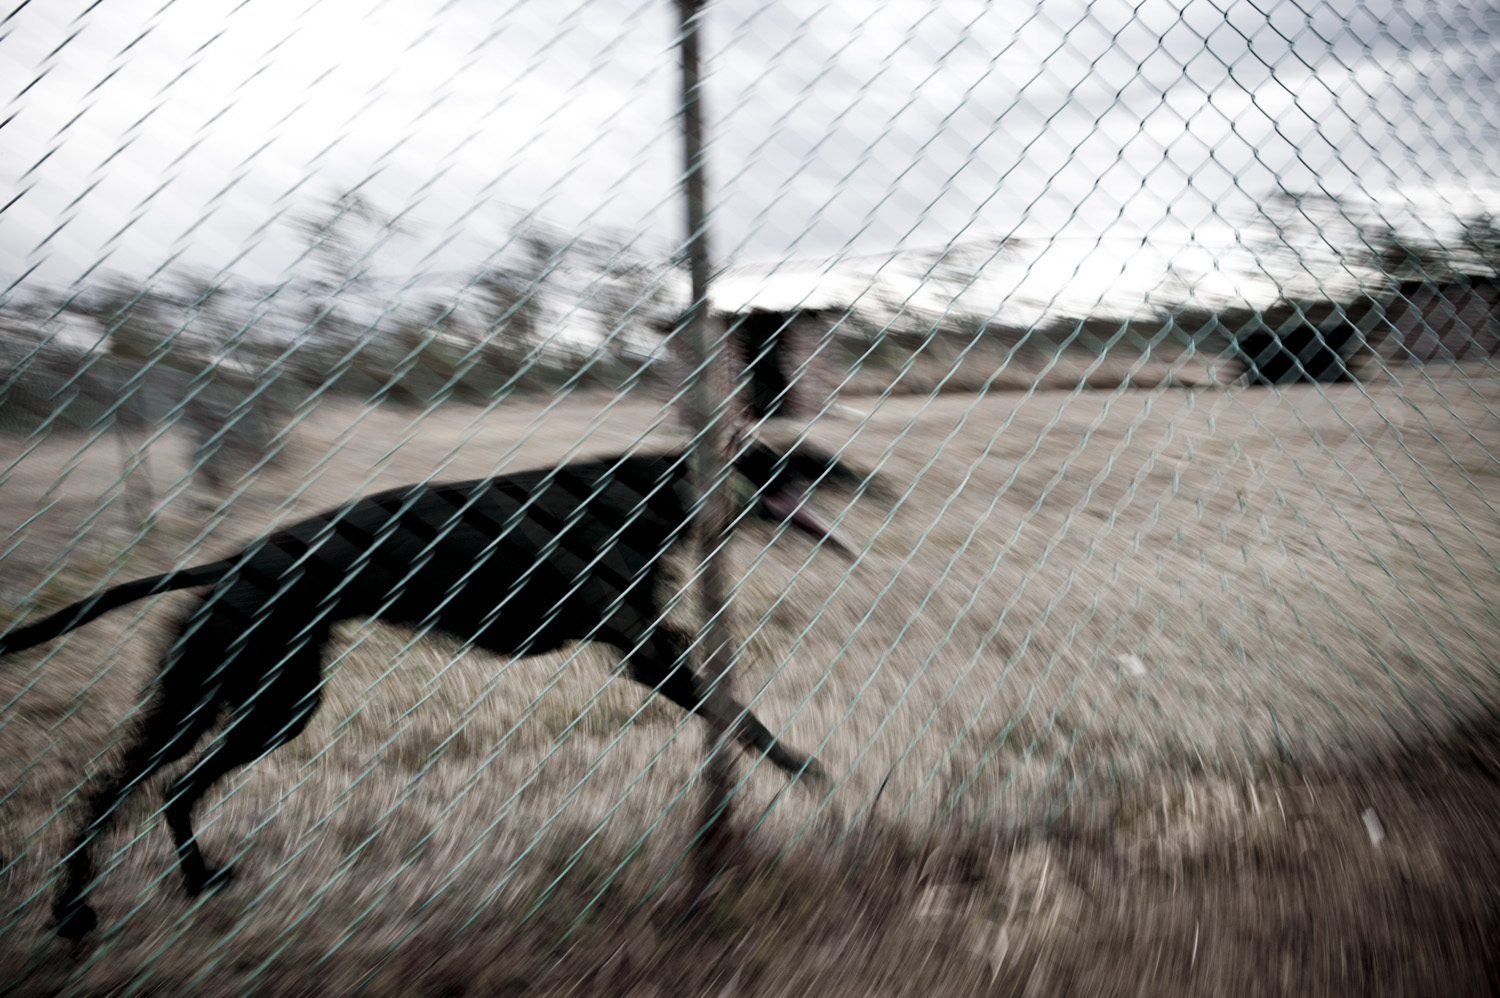 image of AARONTAIT COPYRIGHTED 2014 431 DOCUMENTARY PHOTOGRAPHER REPORTAGE LIFE SPORT DOGS GREYHOUND RACING STORY HUMAN DISHLICKER DISH LICKER BLACKDOG